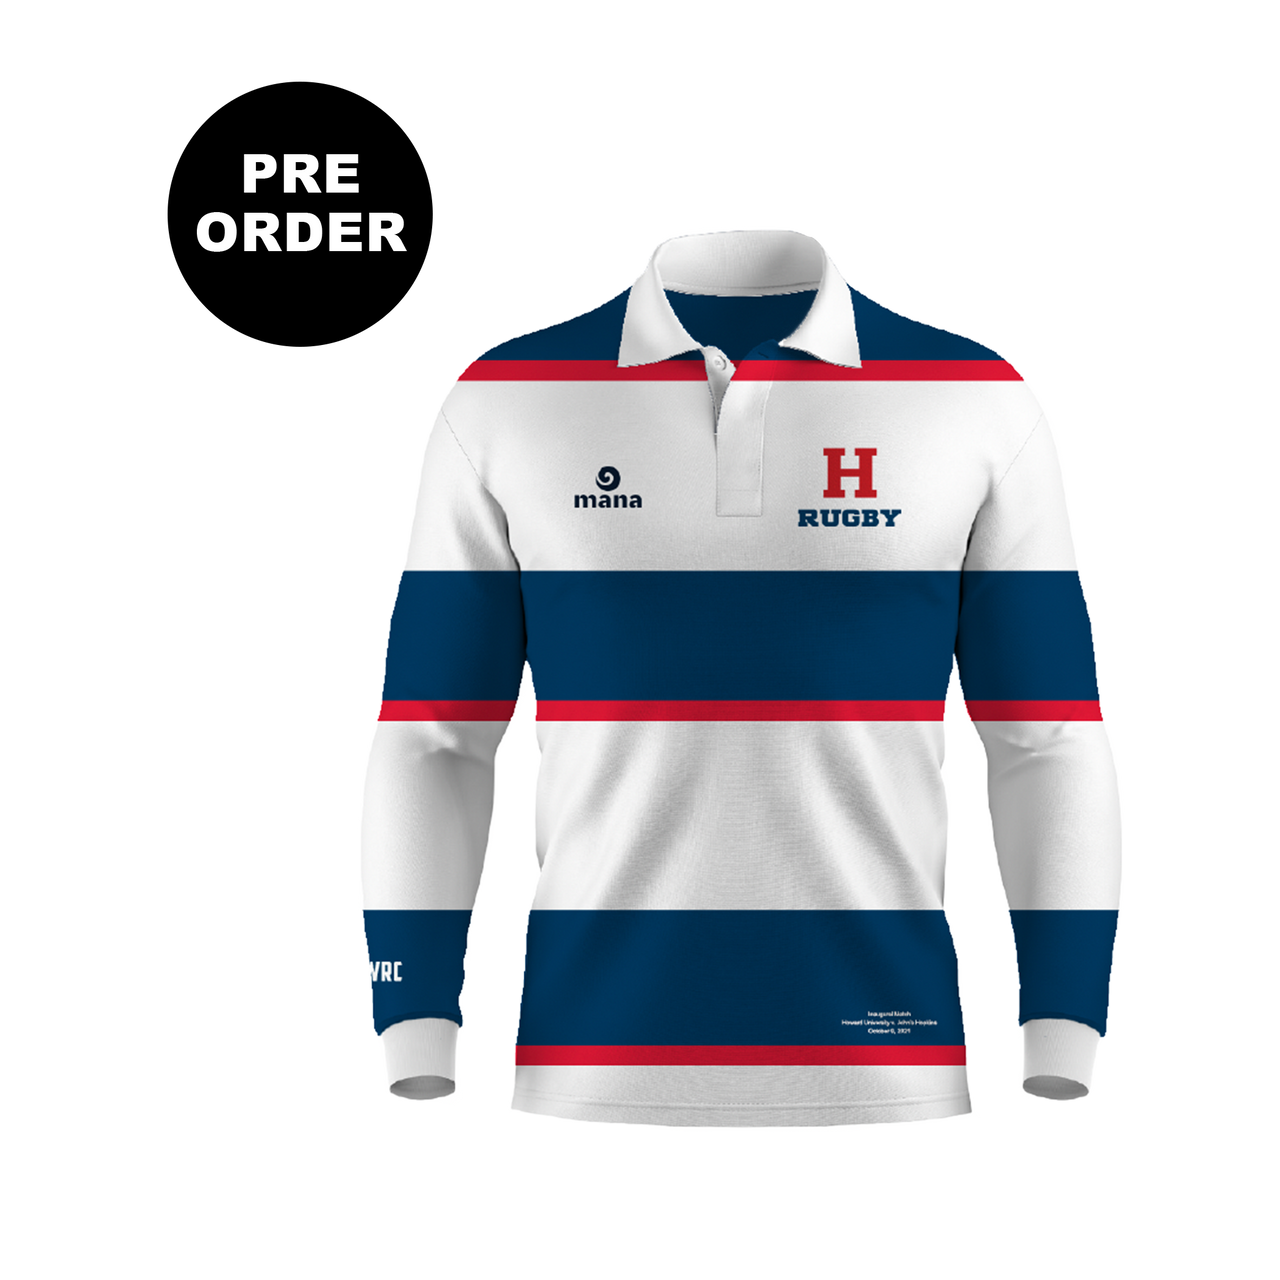 Howard University Classic Rugby Jersey - 21 Back Option